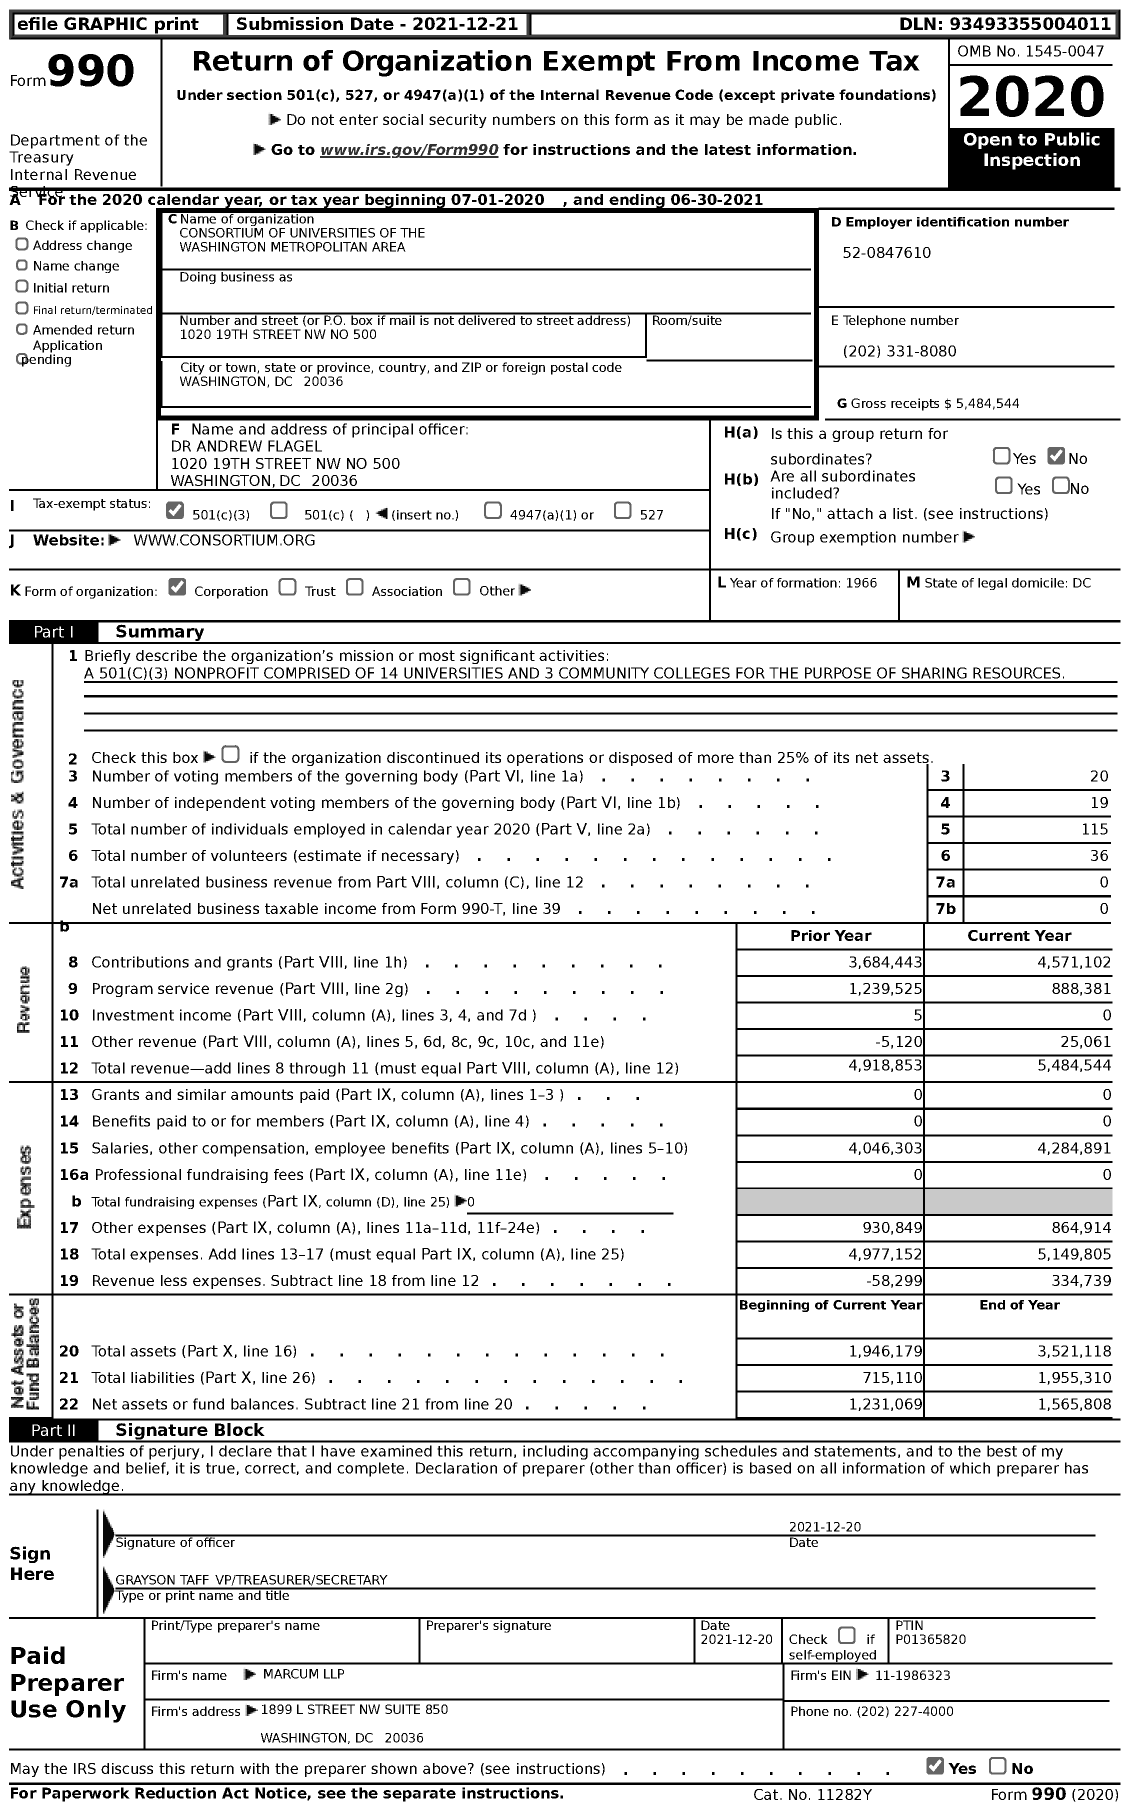 Image of first page of 2020 Form 990 for Consortium of Universities of the Washington Metropolitan Area